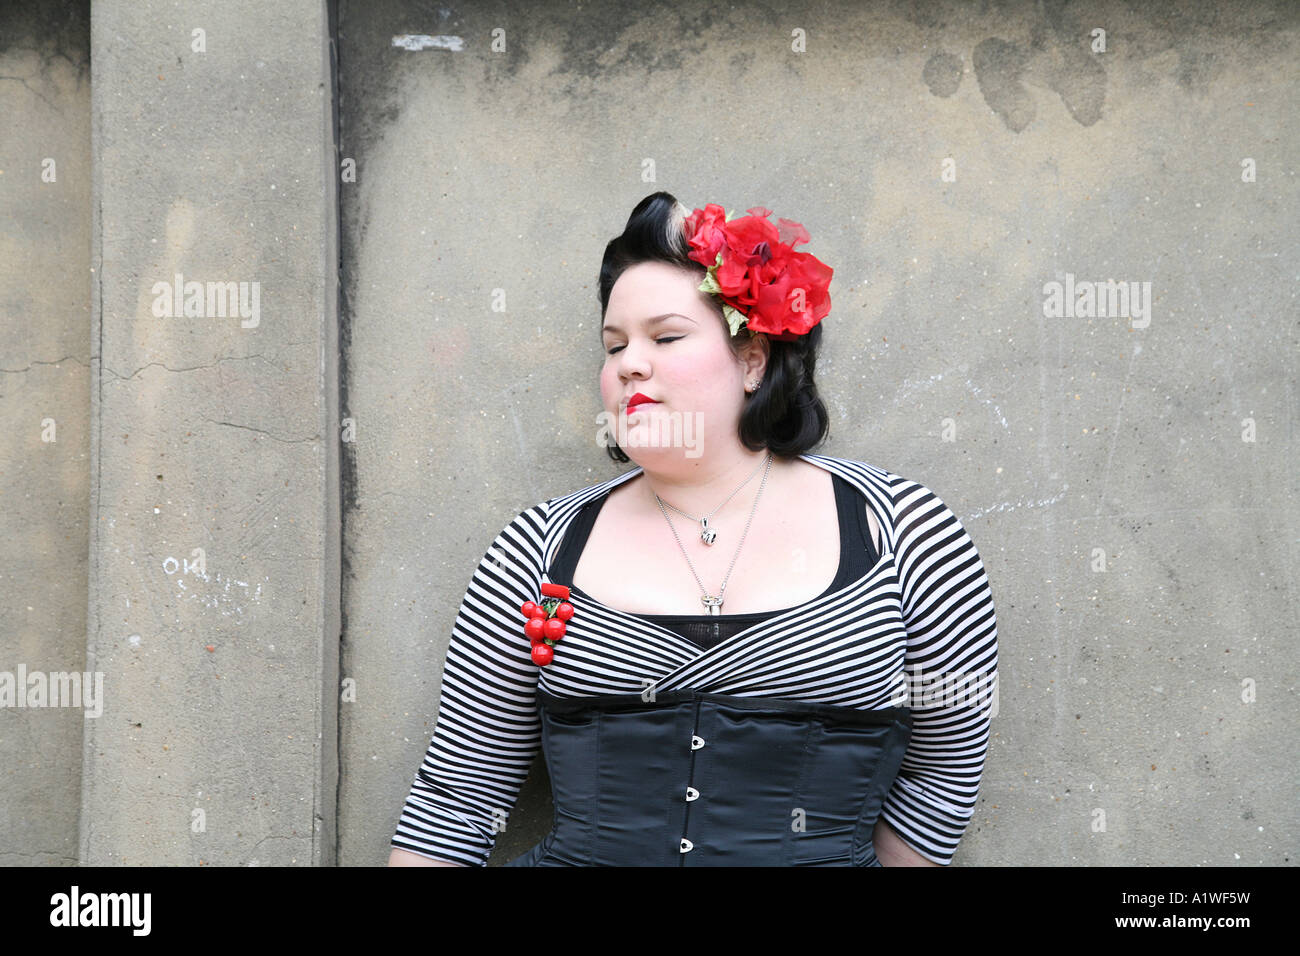 Portrait of a punk girl wearing tight clothes and red flowers, UK 2006 Stock Photo